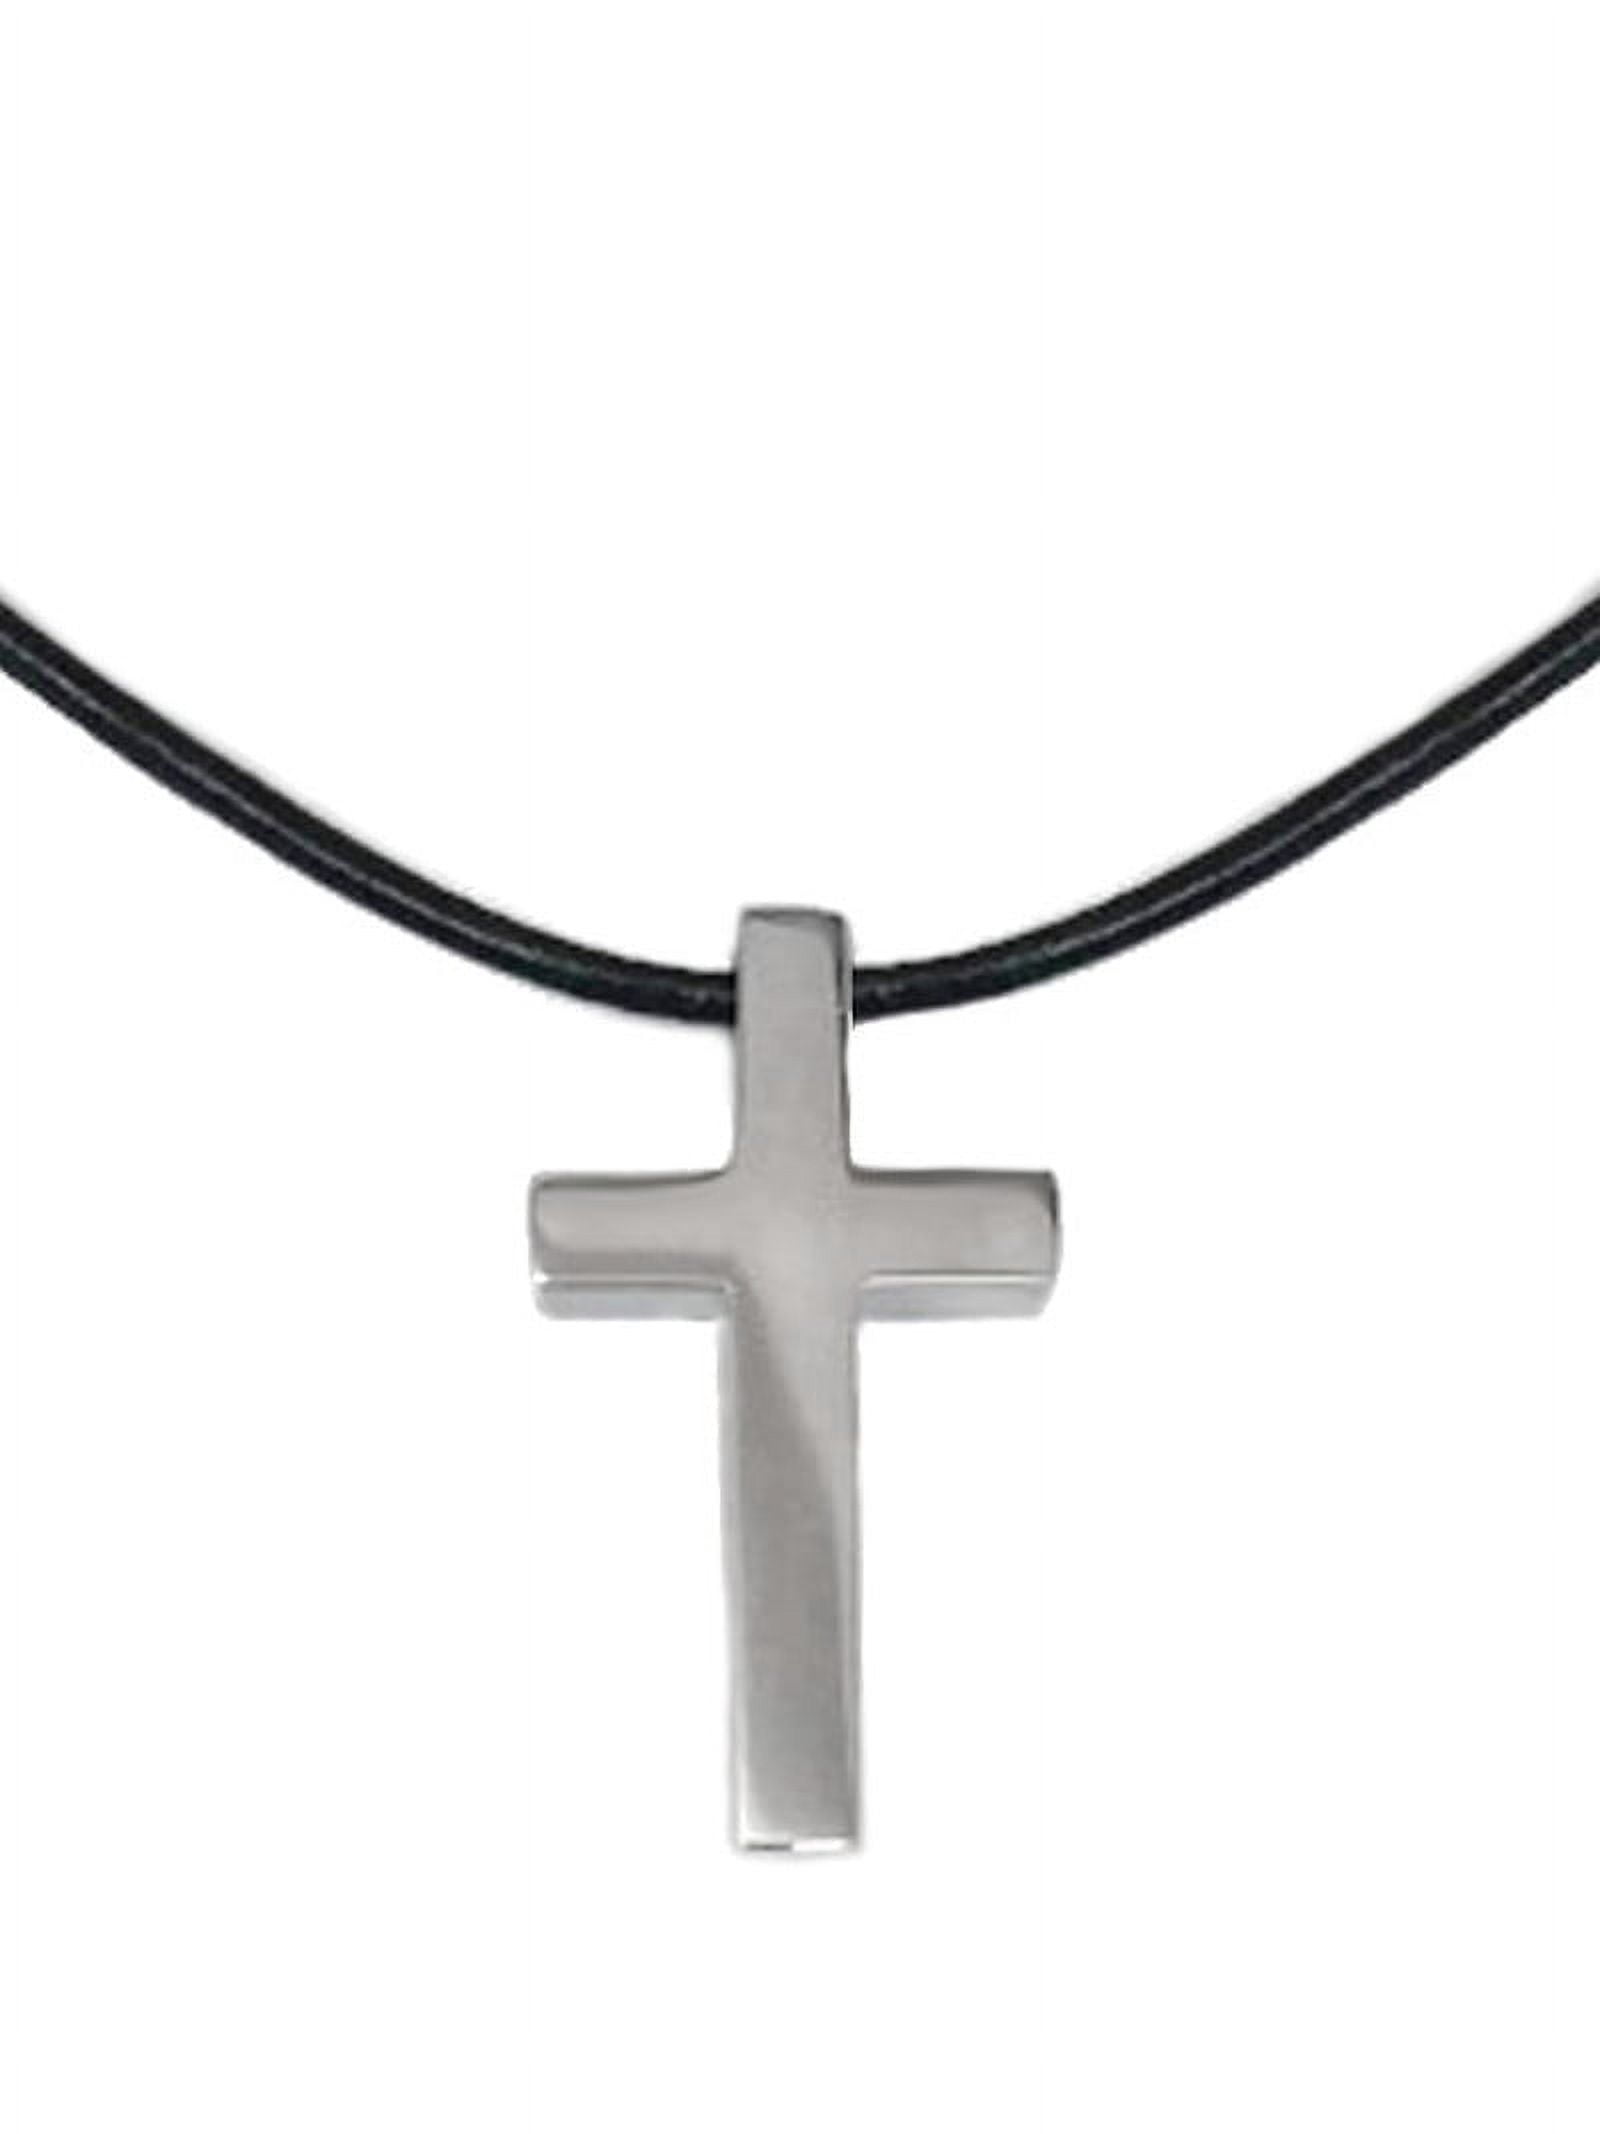 MENS NECLACE CROSS PENDANT Adjustable Leather Cord Rope Man Surfer Beads  Boys £8.95 - PicClick UK